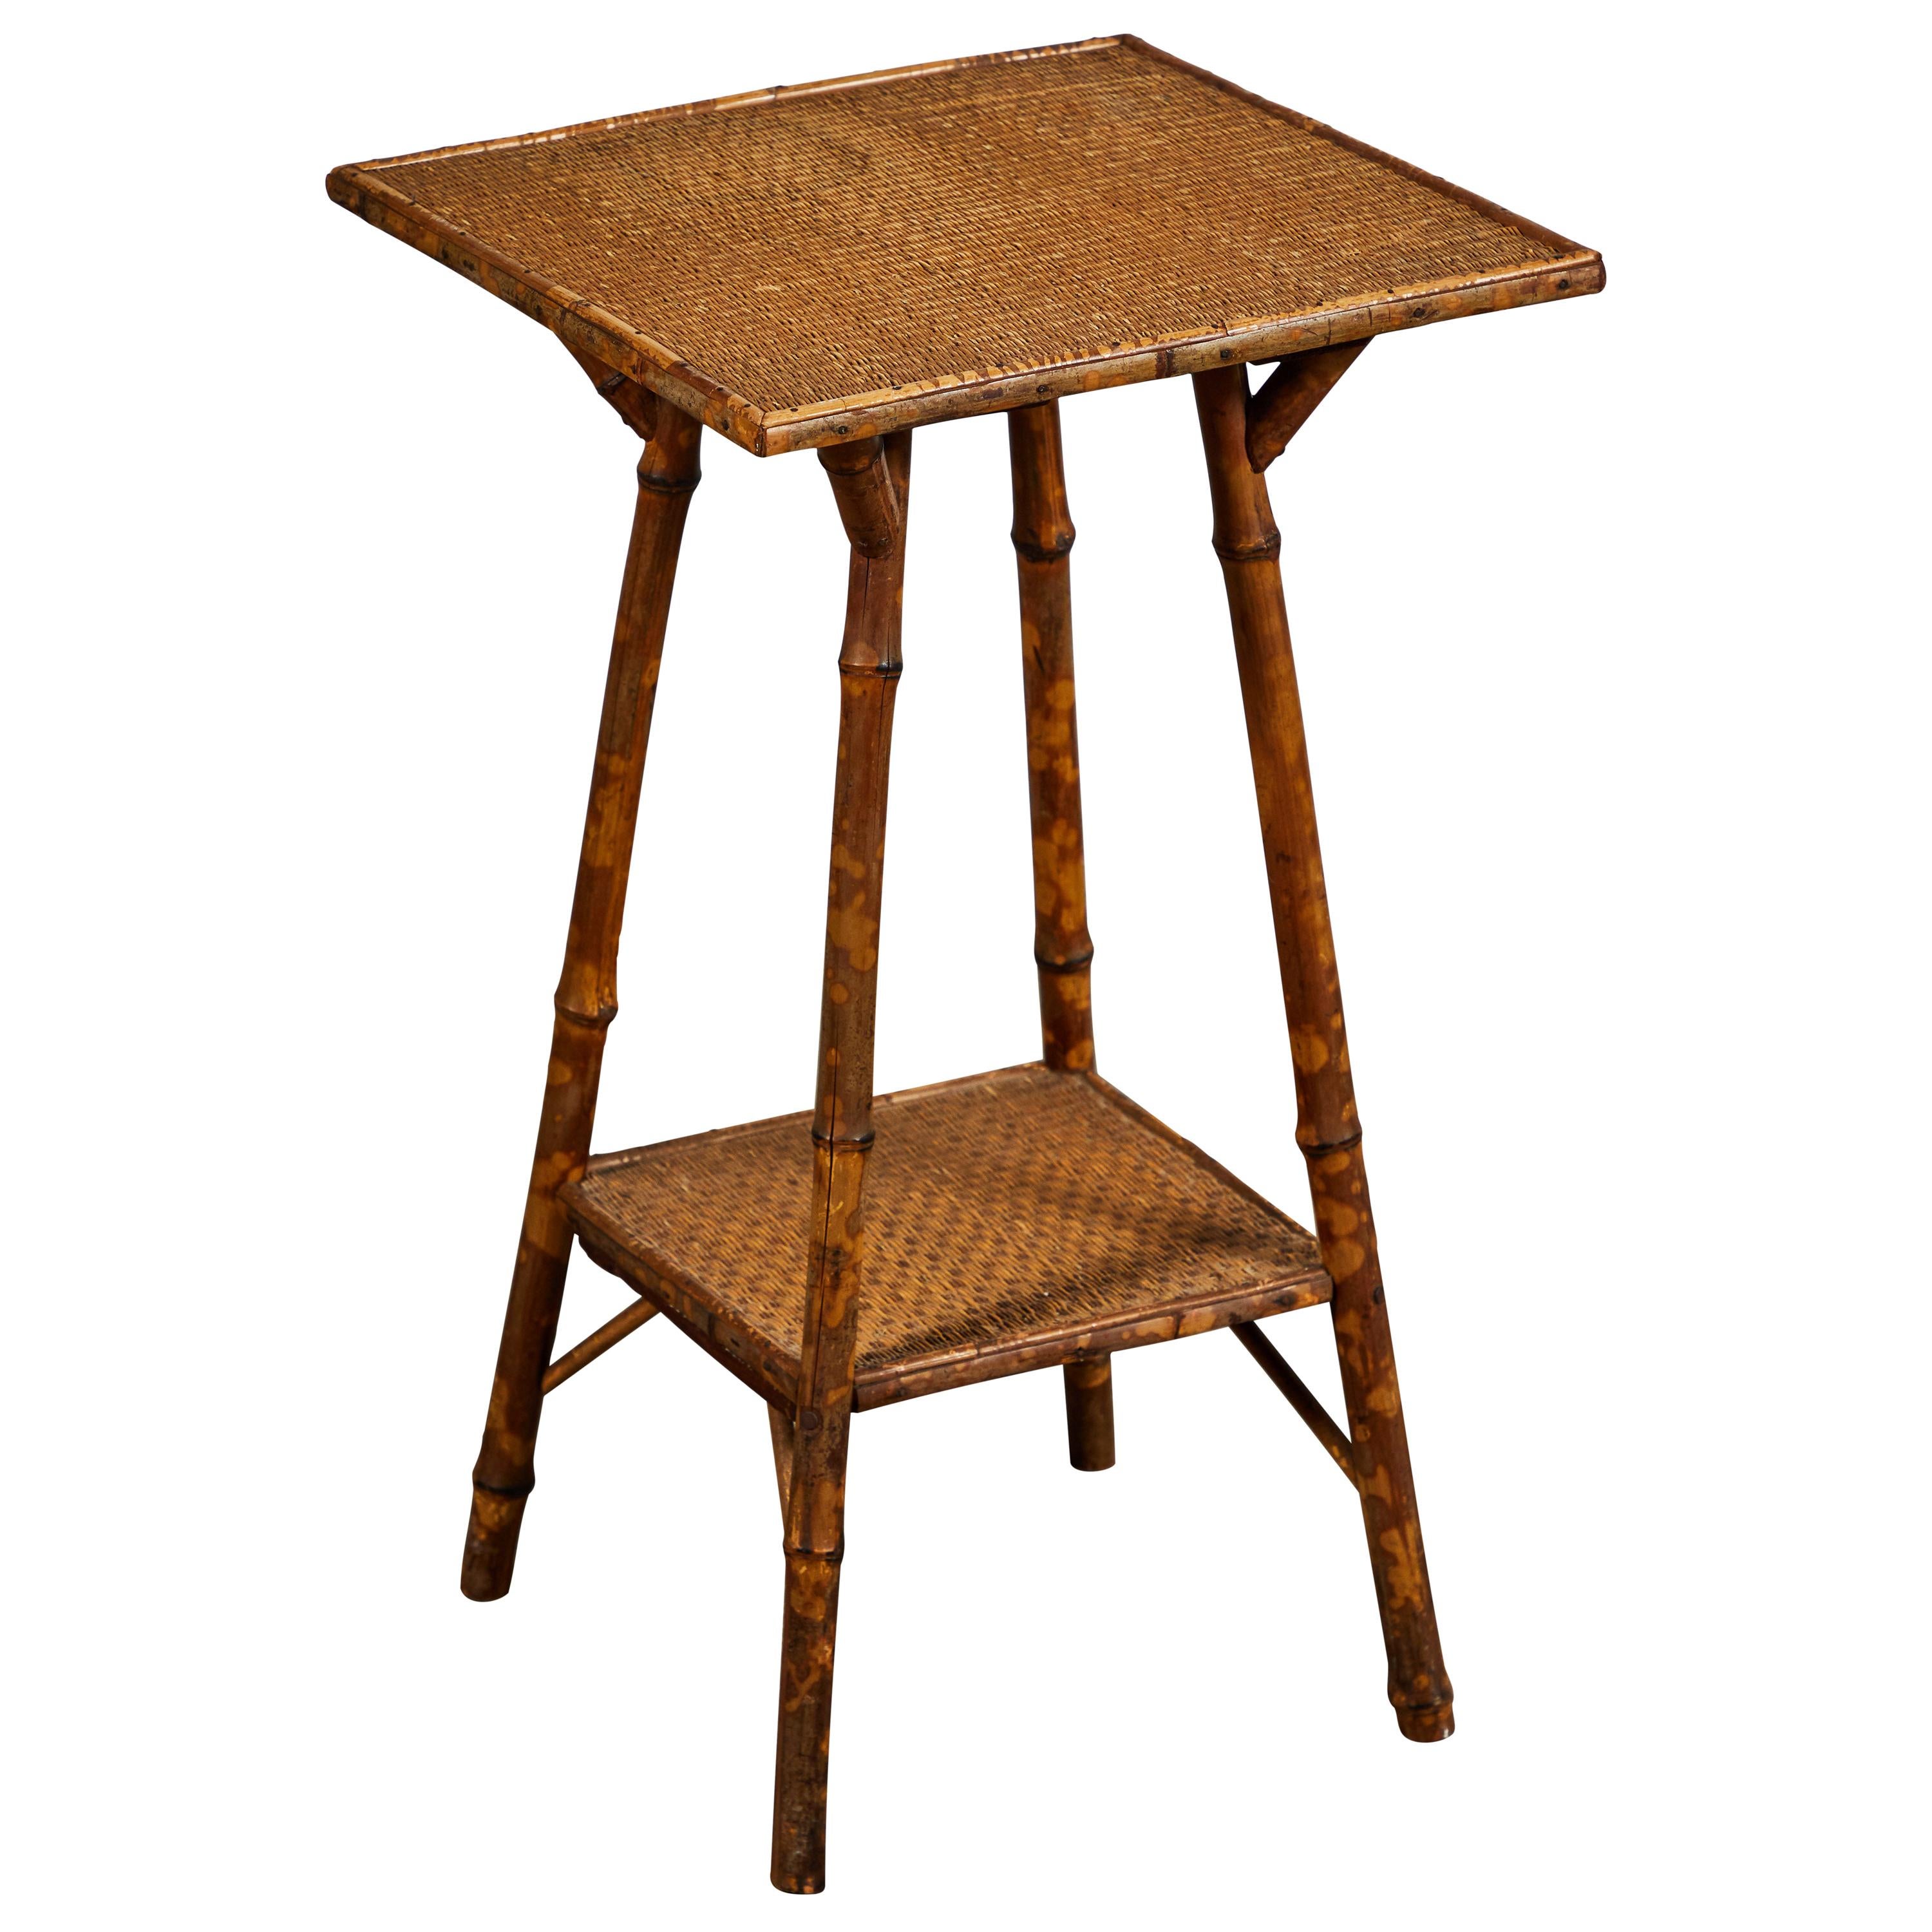 Two-Tiered Bamboo Side Table